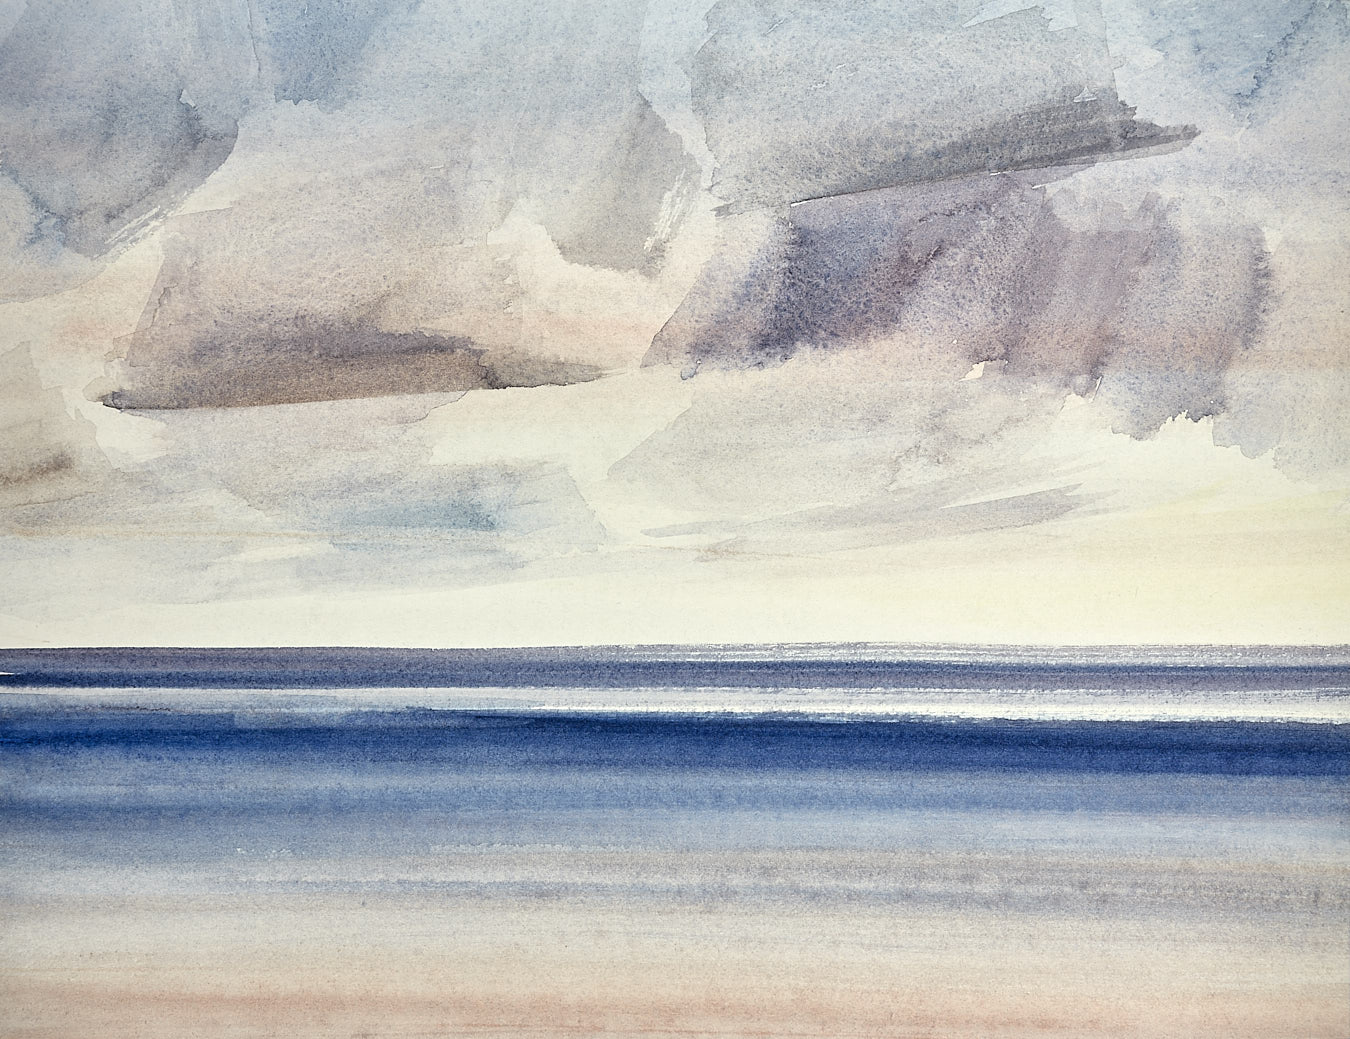 Large image of Sunset by the shore original watercolour painting by Timothy Gent